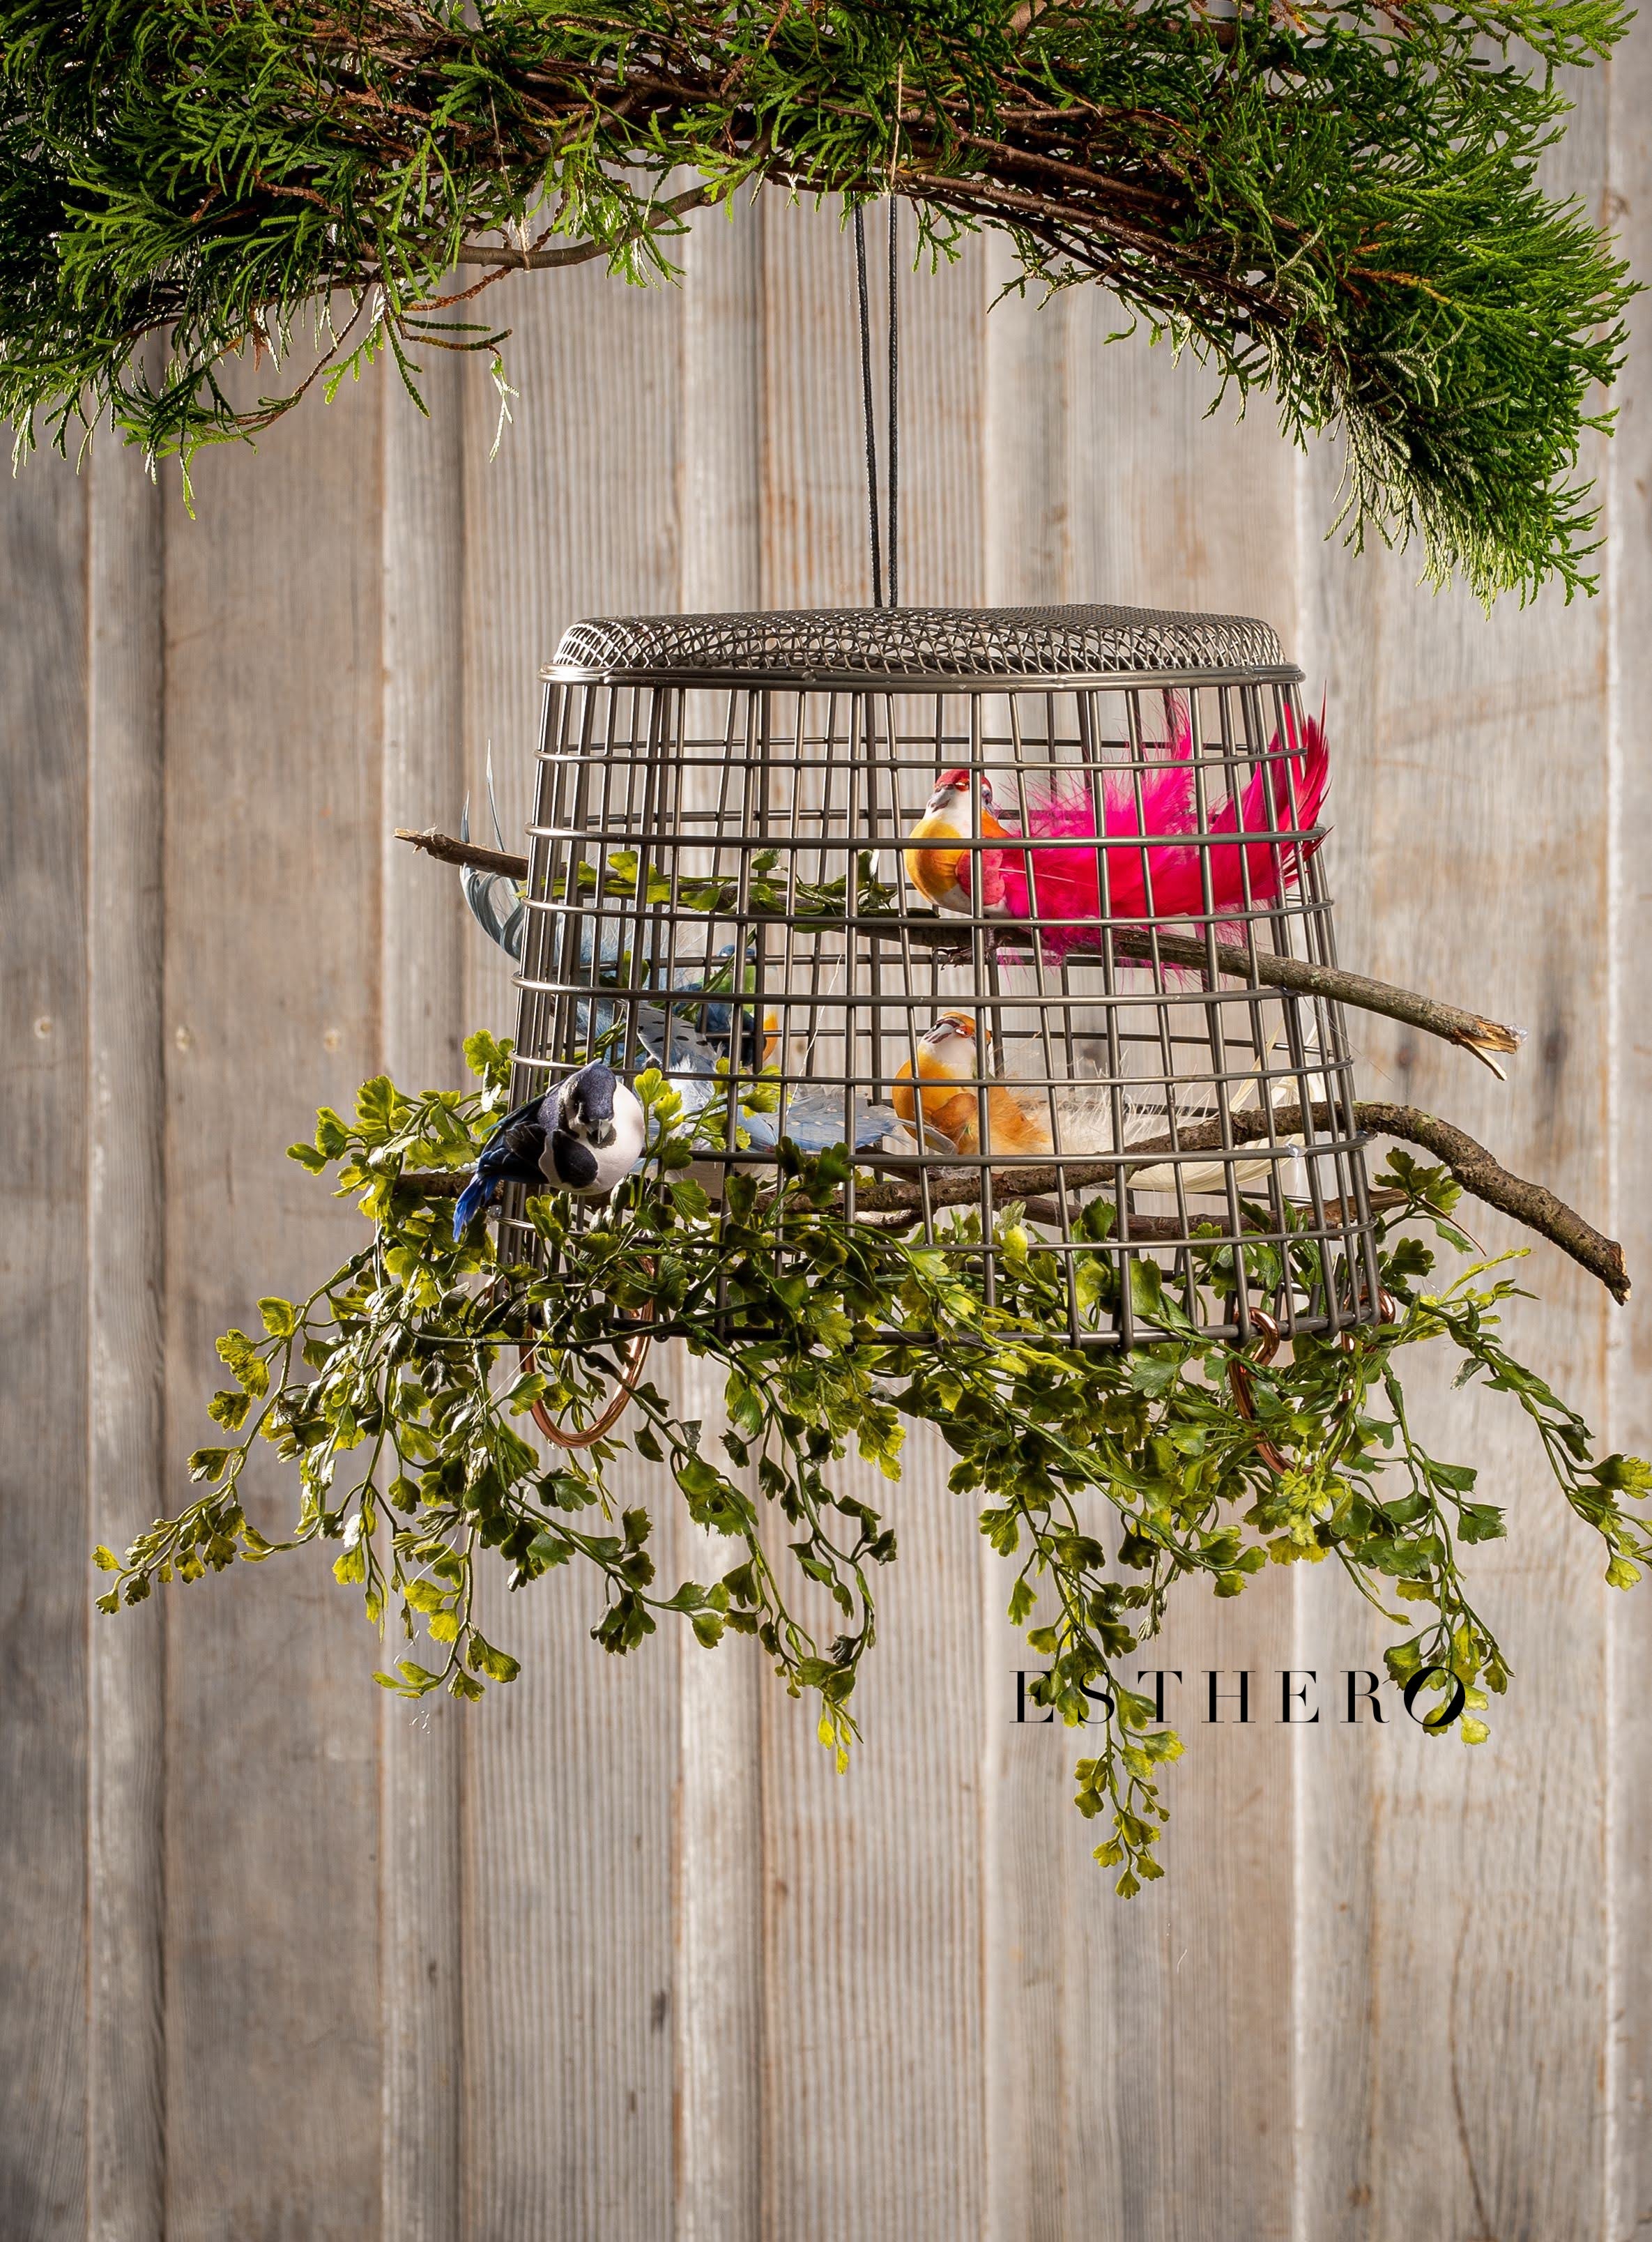 Hanging Baskets – Crafts by Esther O